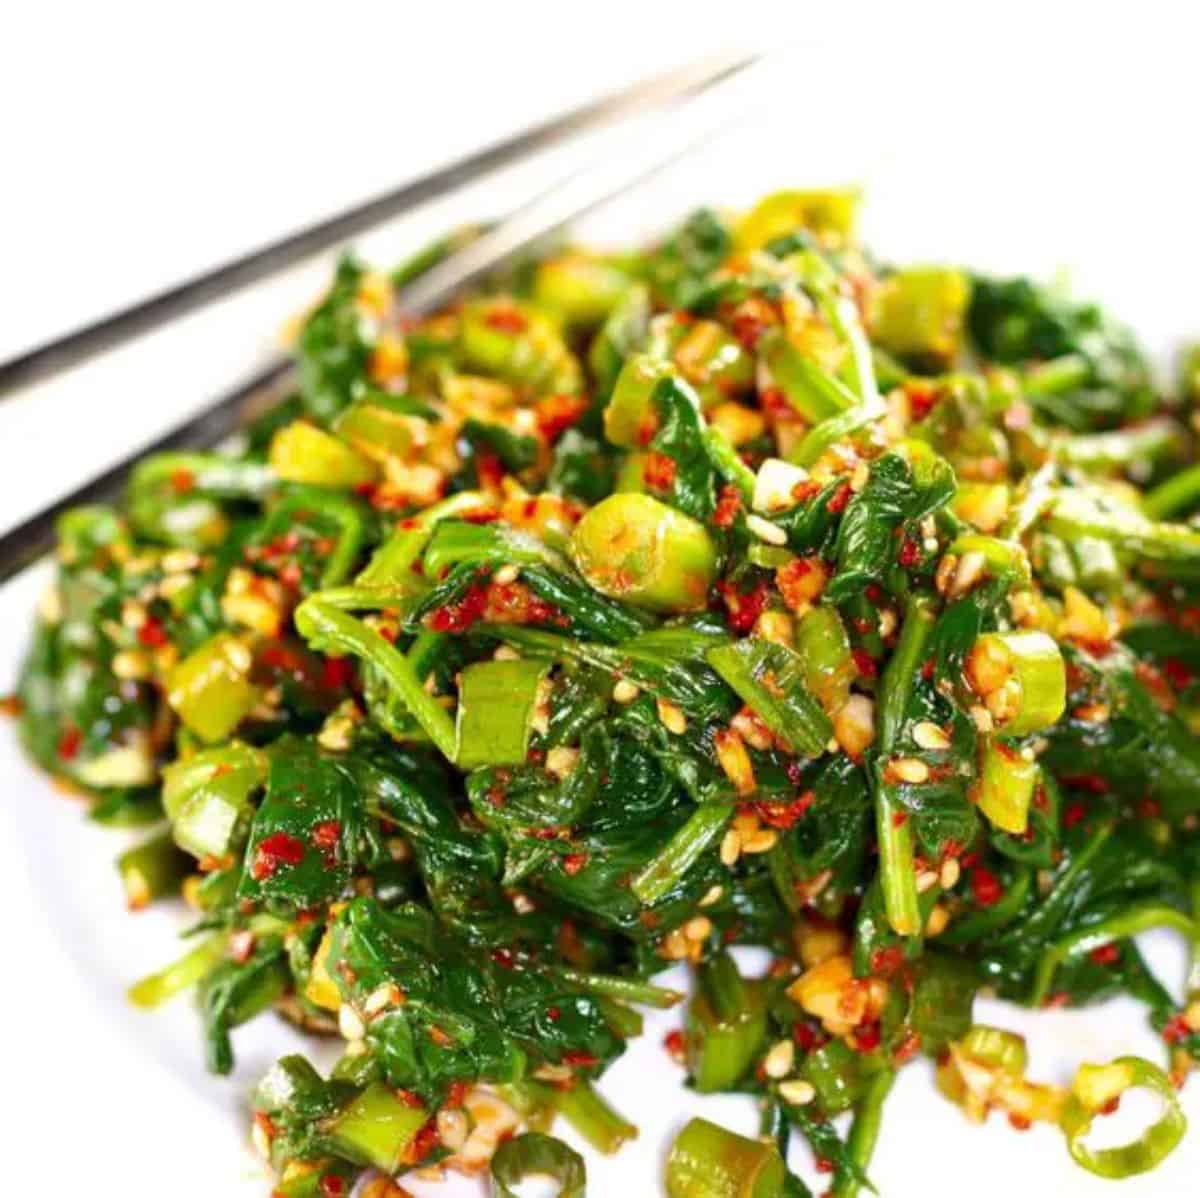 Healthy and delicious Korean Spinach on a plate.